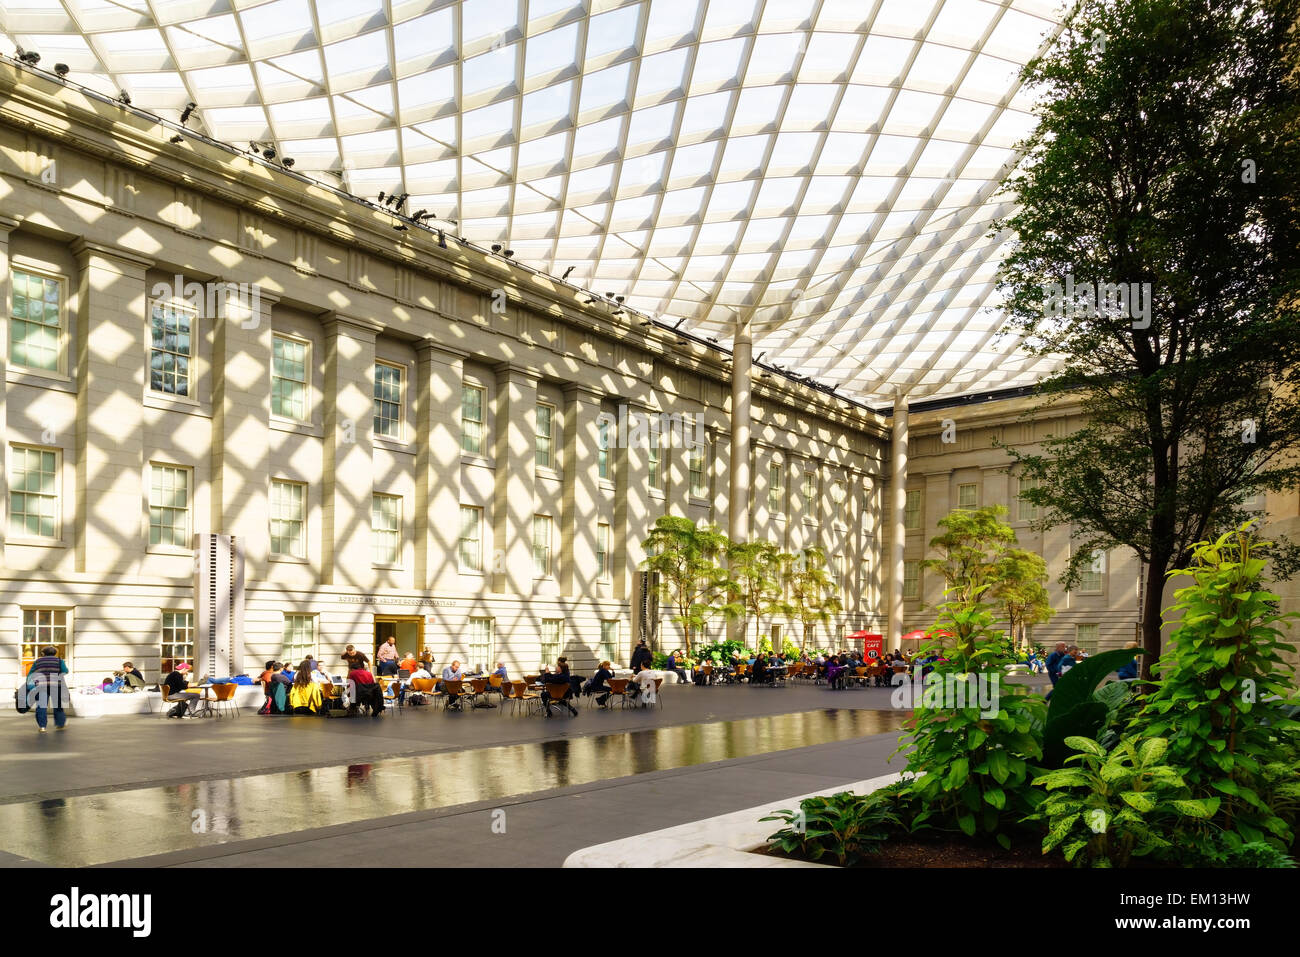 The covered courtyard at the Smithsonian art gallery in Washington DC, USA. Stock Photo